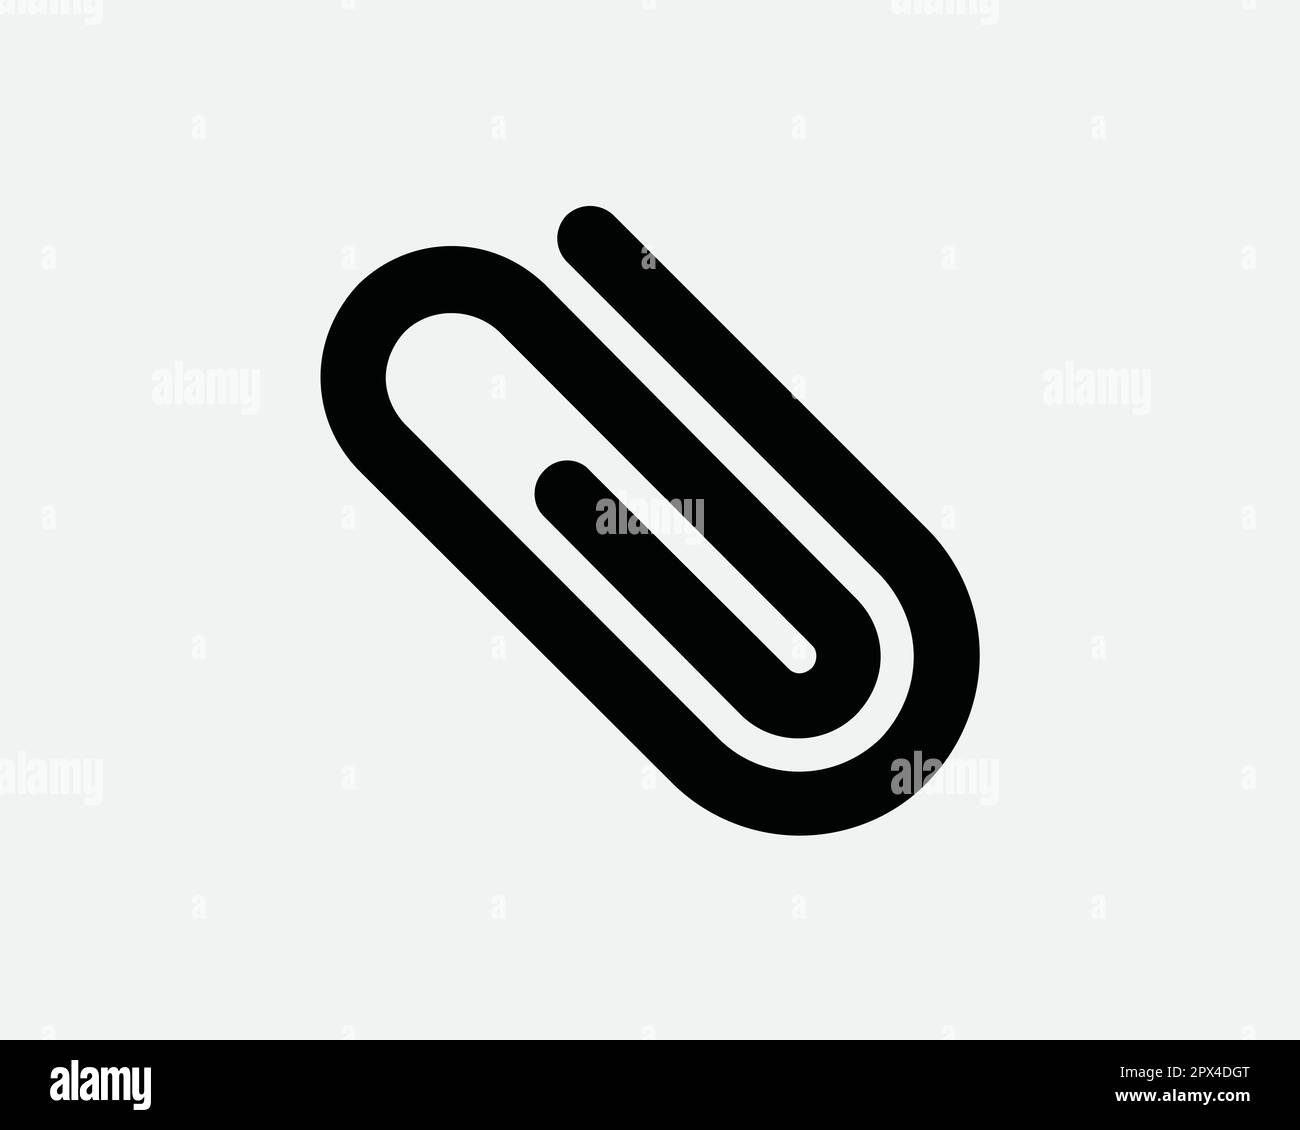 Paperclip Paper Clip Black Icon. File Document Attach Email Attachment Symbol. Office Stationery School Supplies Sign. Vector Graphic Clipart Cricut Stock Vector